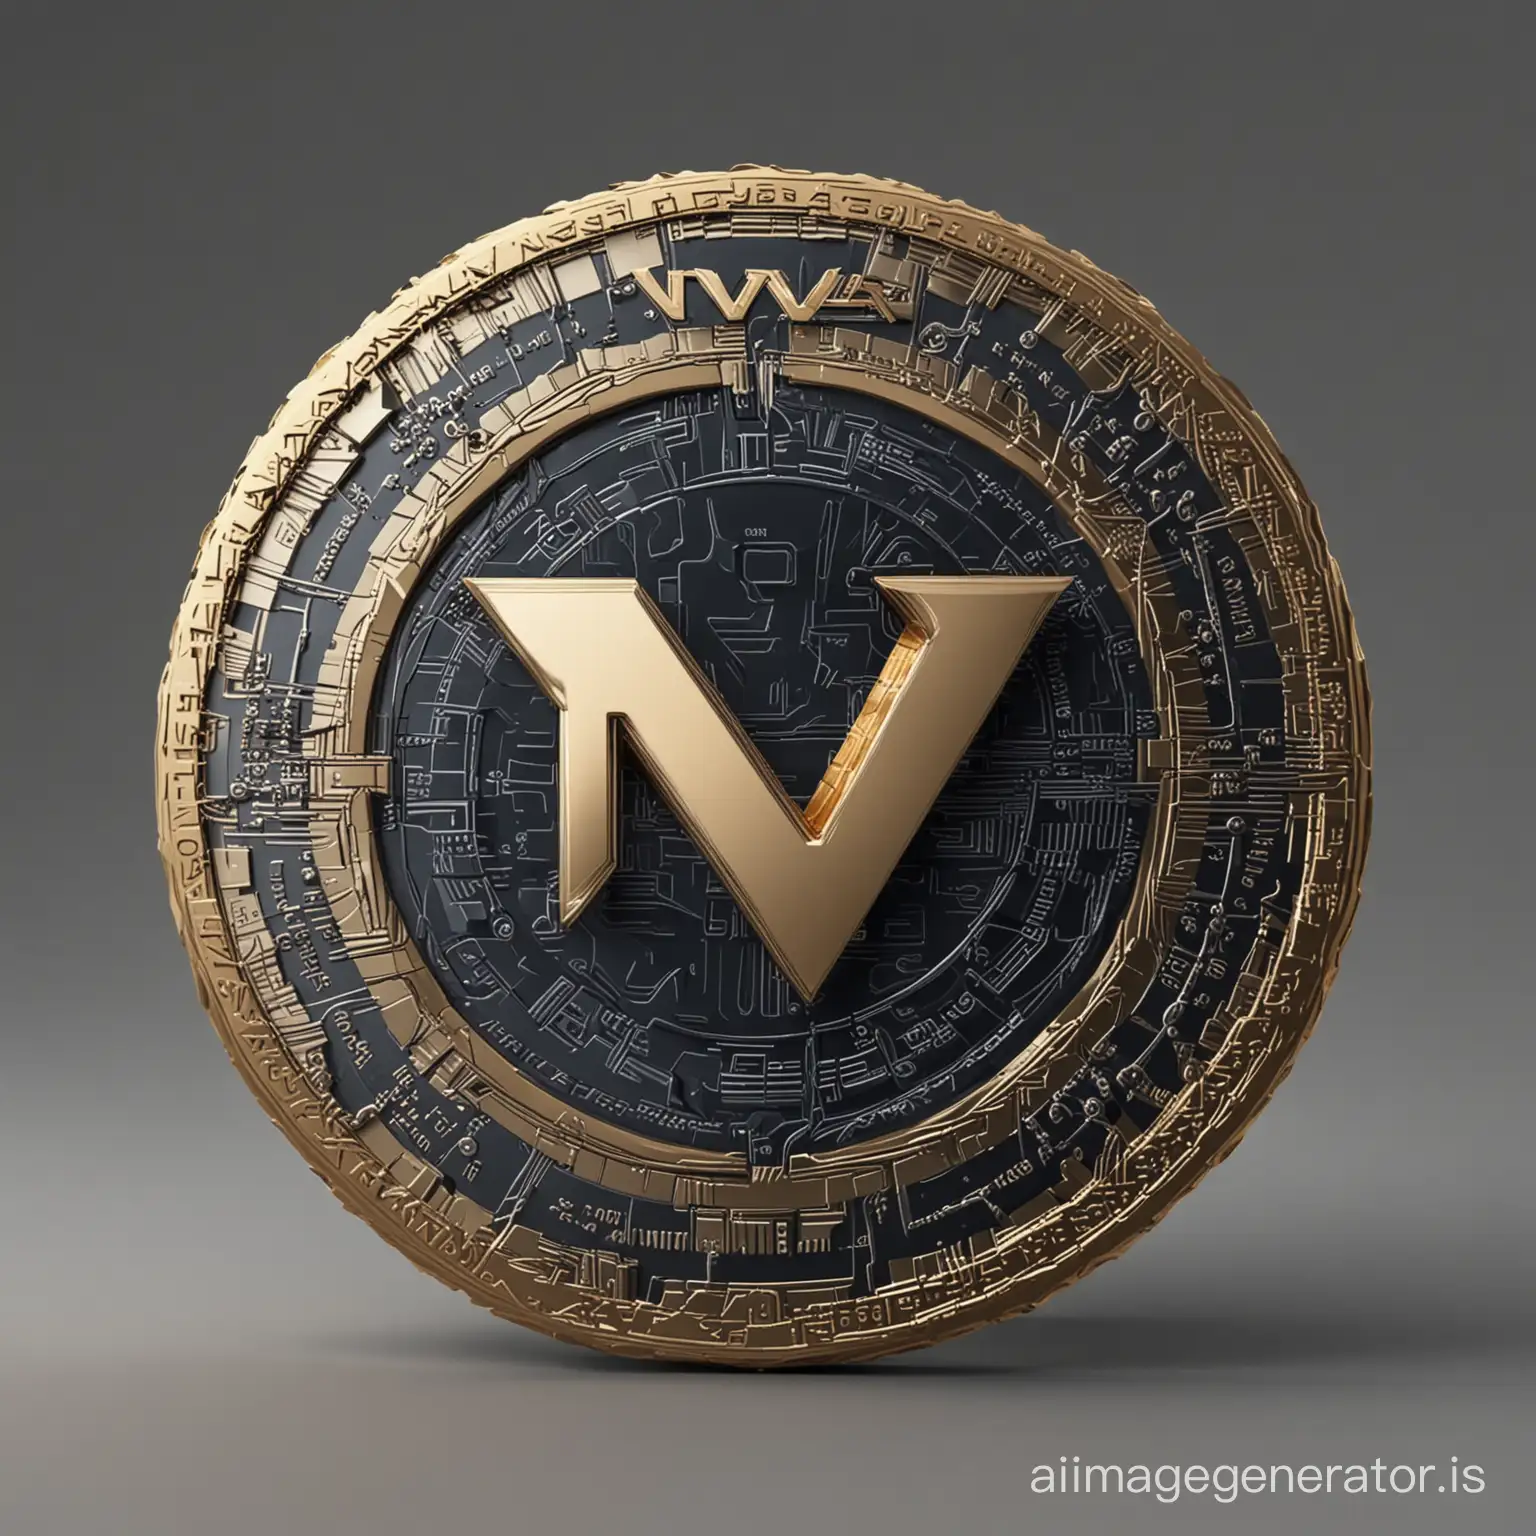 futuristic NV logo in coin style 3D without background 
NV means NovaVortex its token for crypto currency